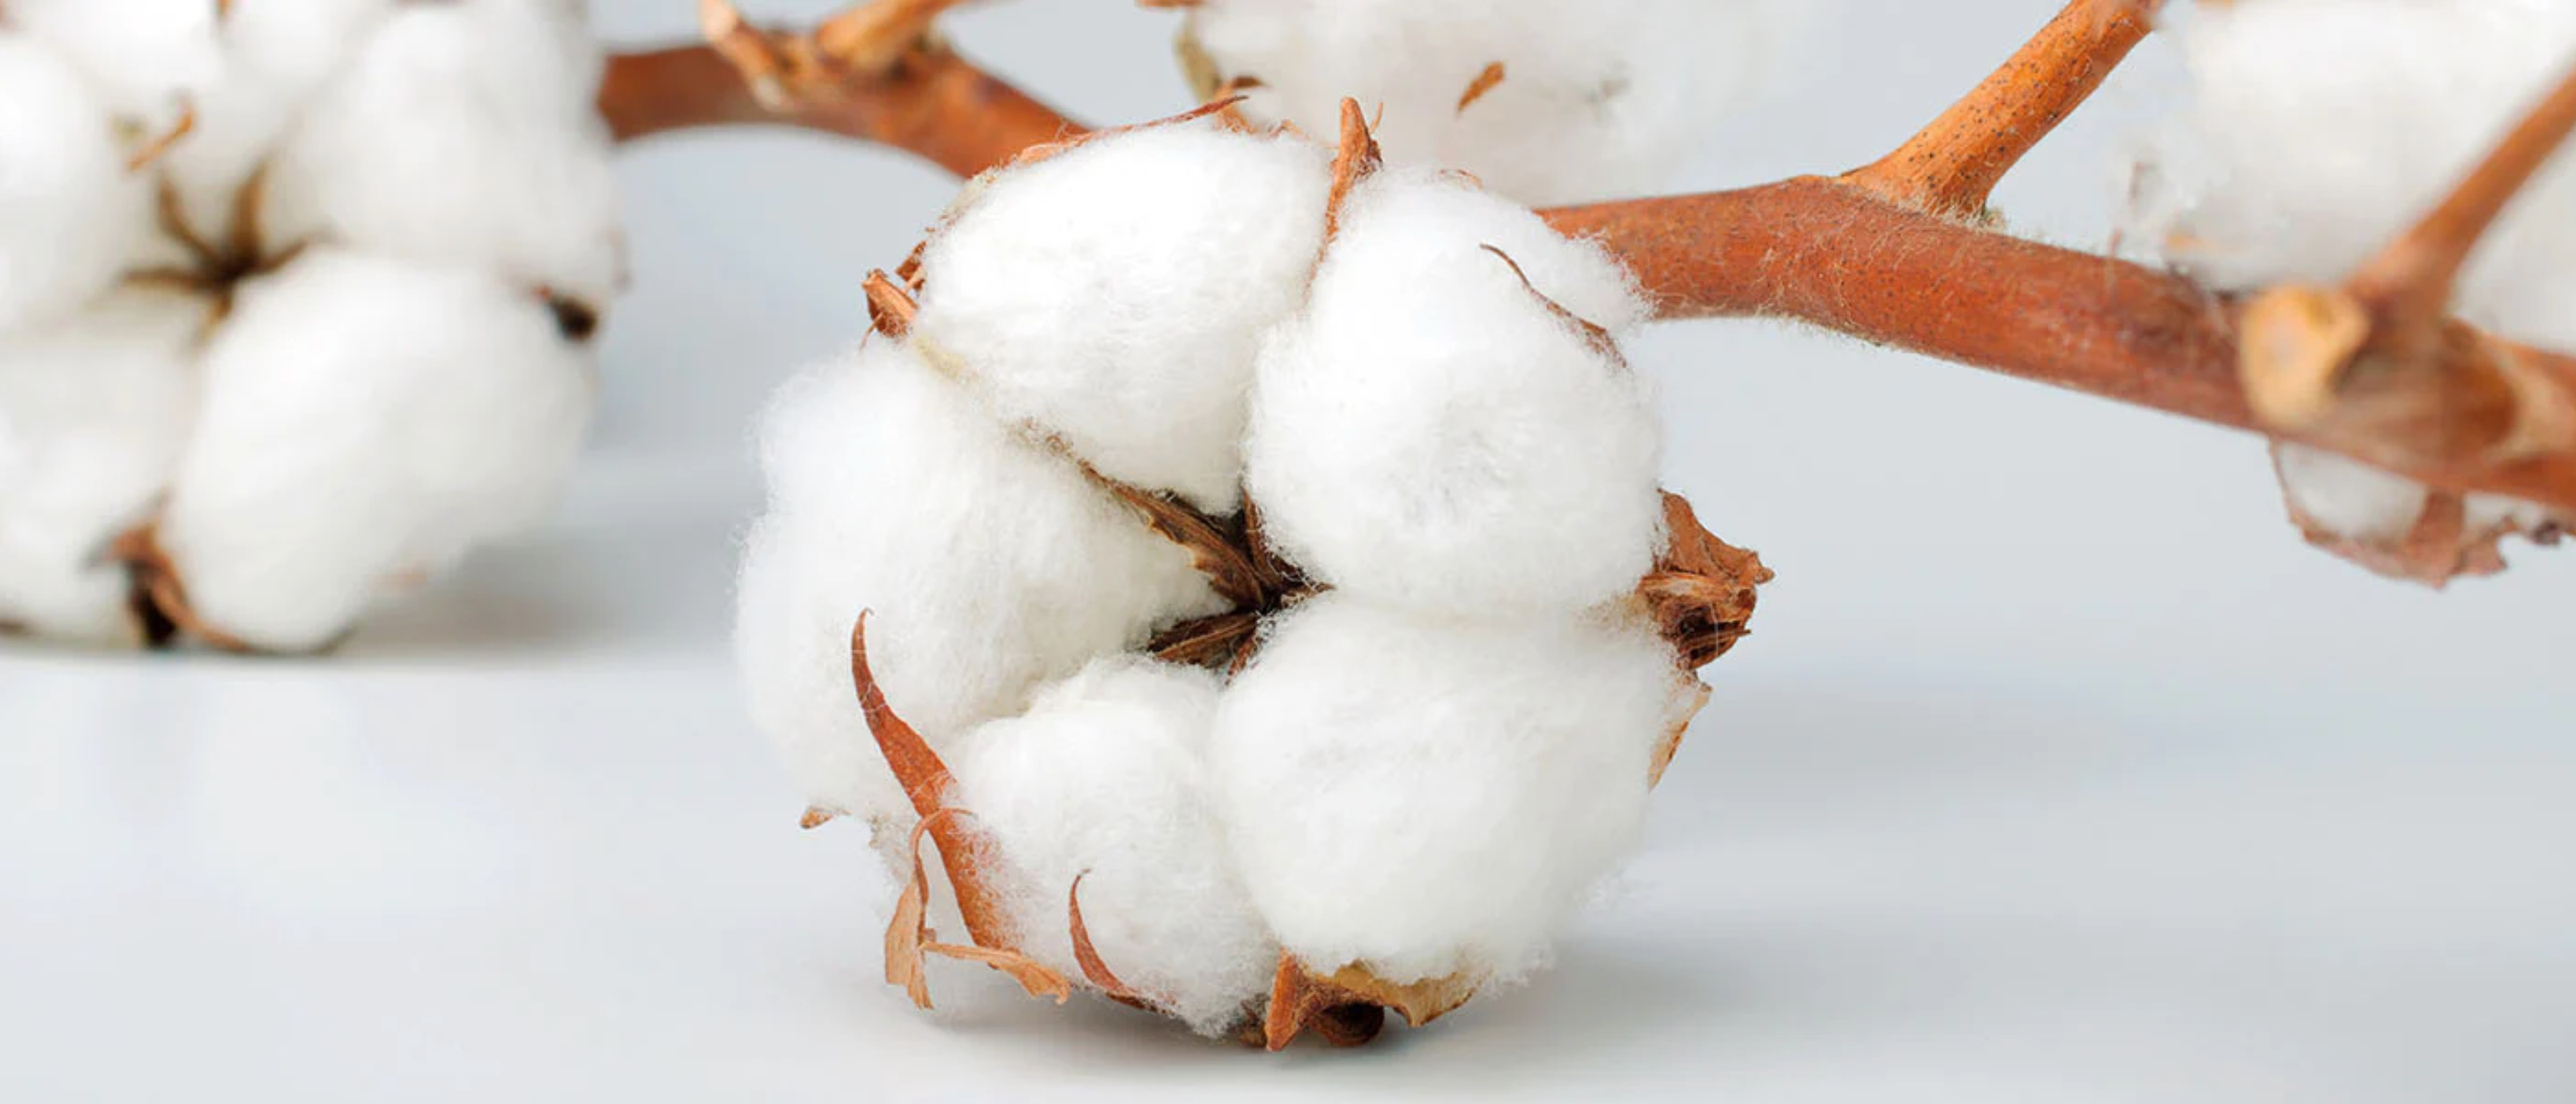 Organic vs Regular Cotton: What You Need to Know Before You Buy